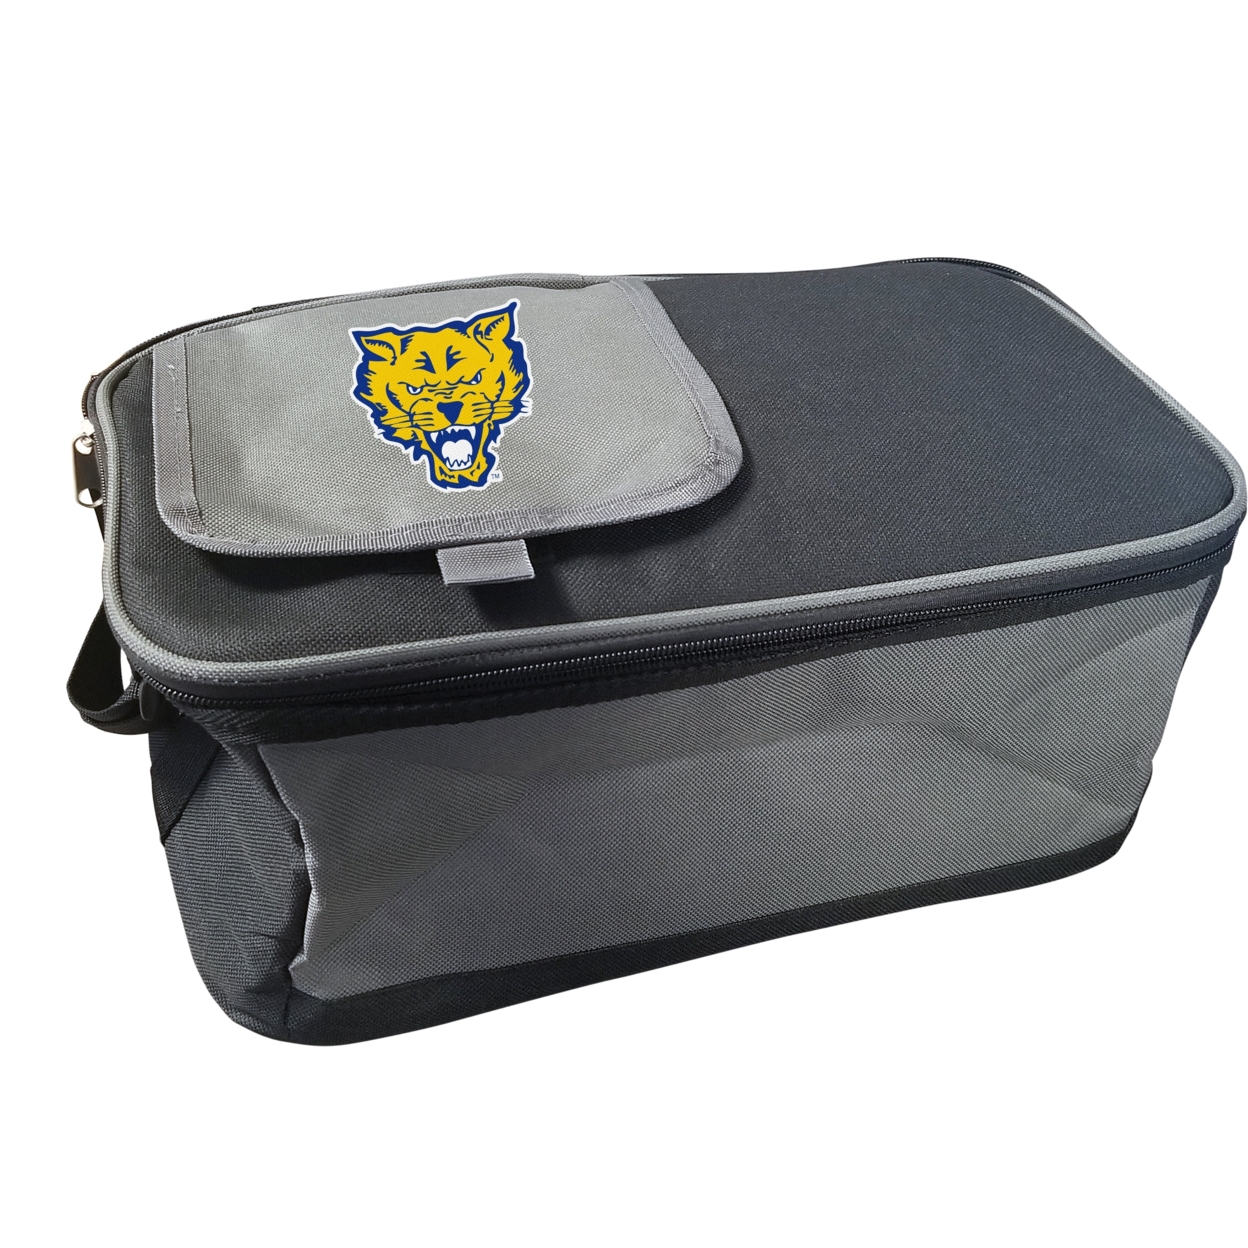 Fort Valley State University 9 Pack Cooler